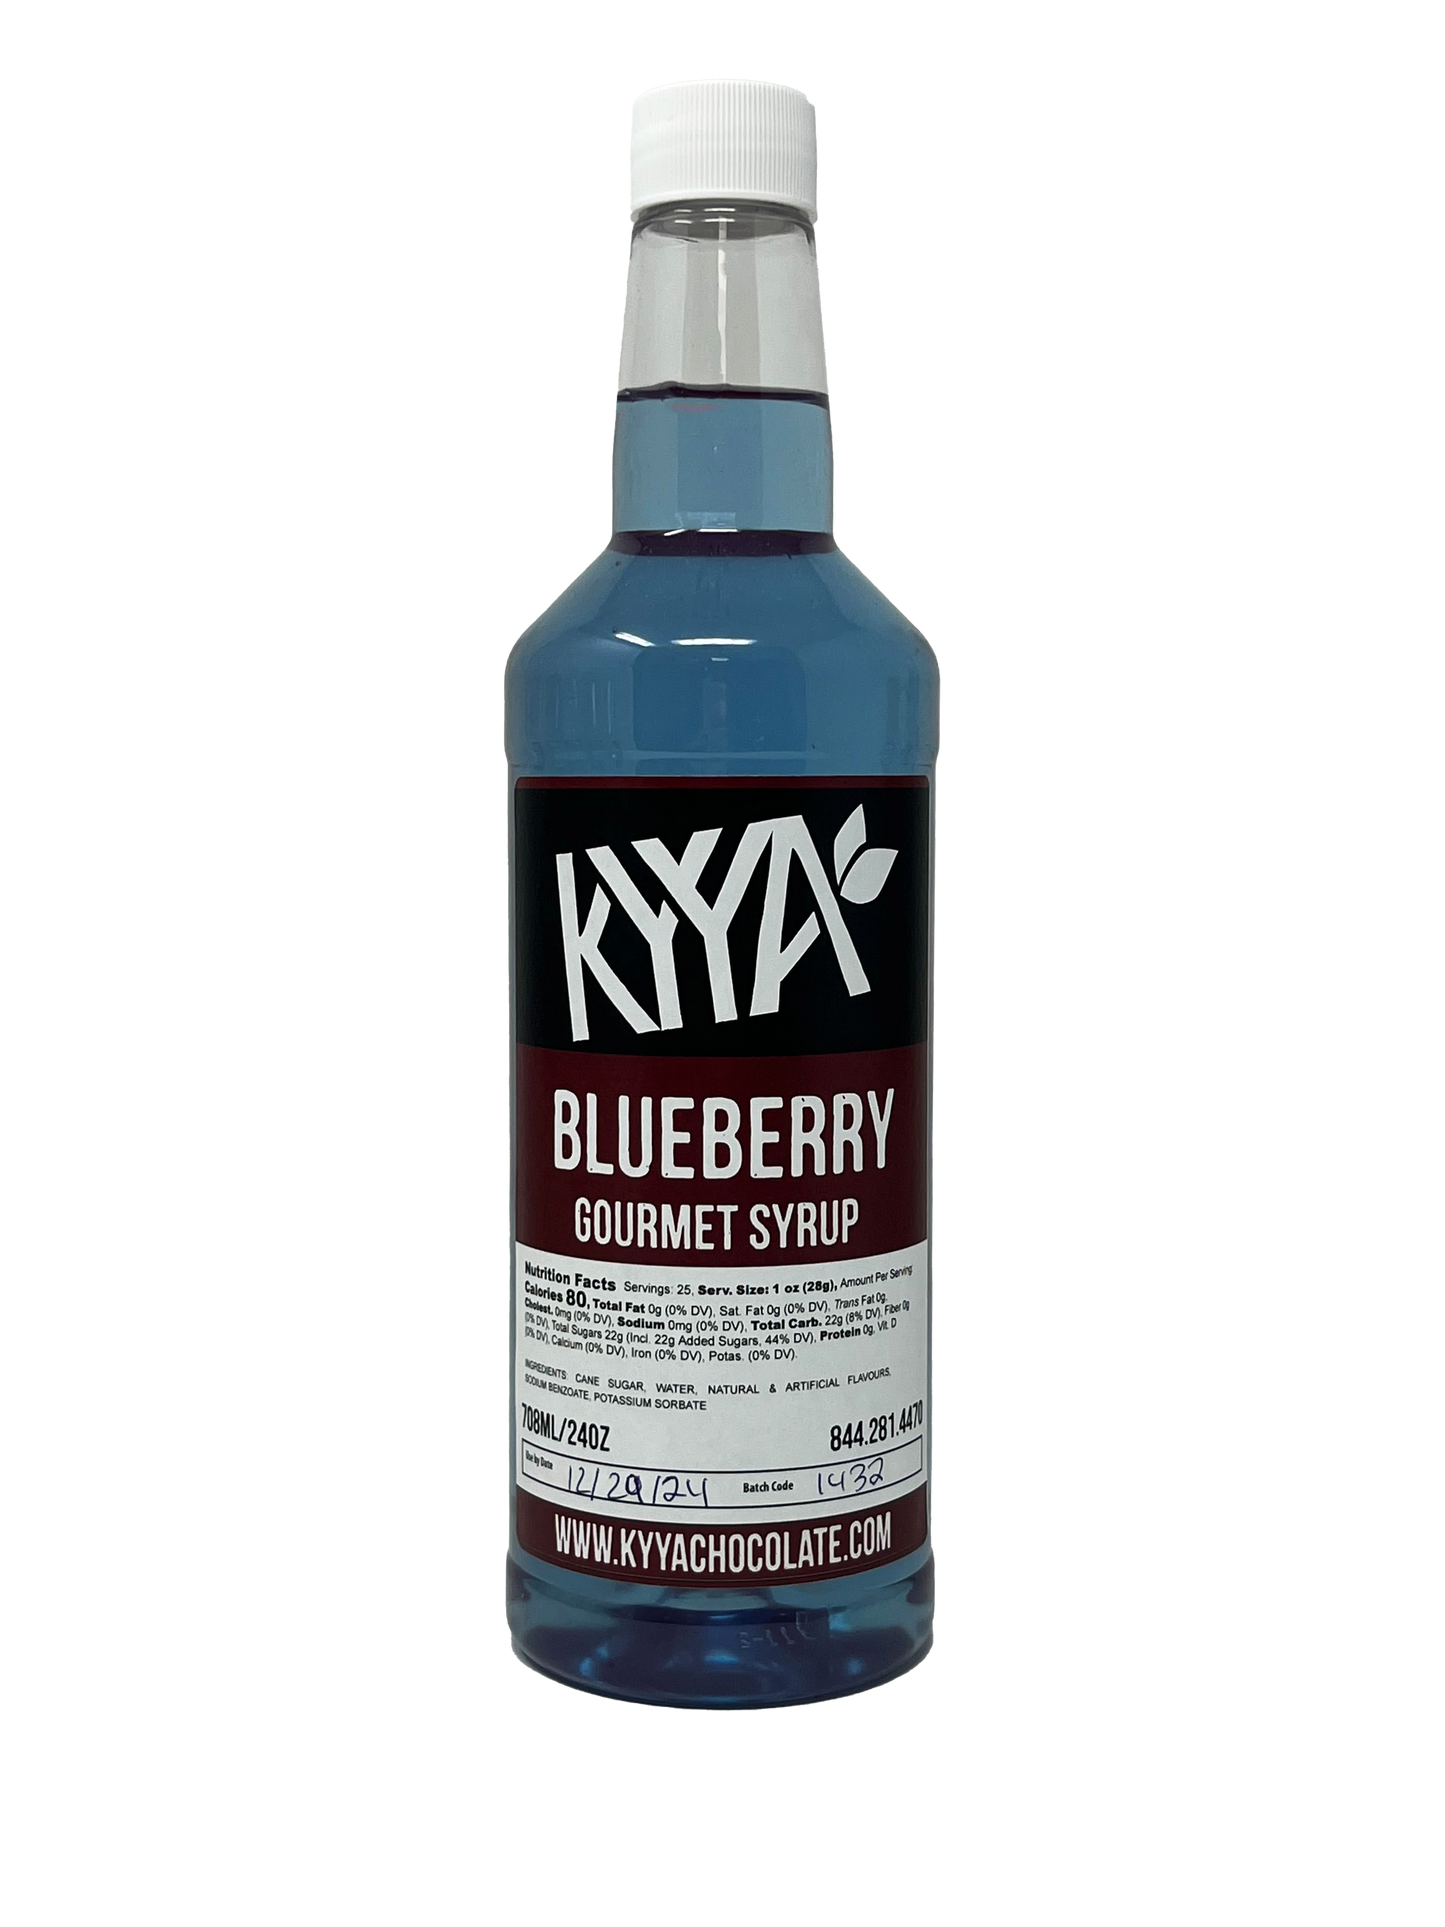 Blueberry Gourmet Syrup